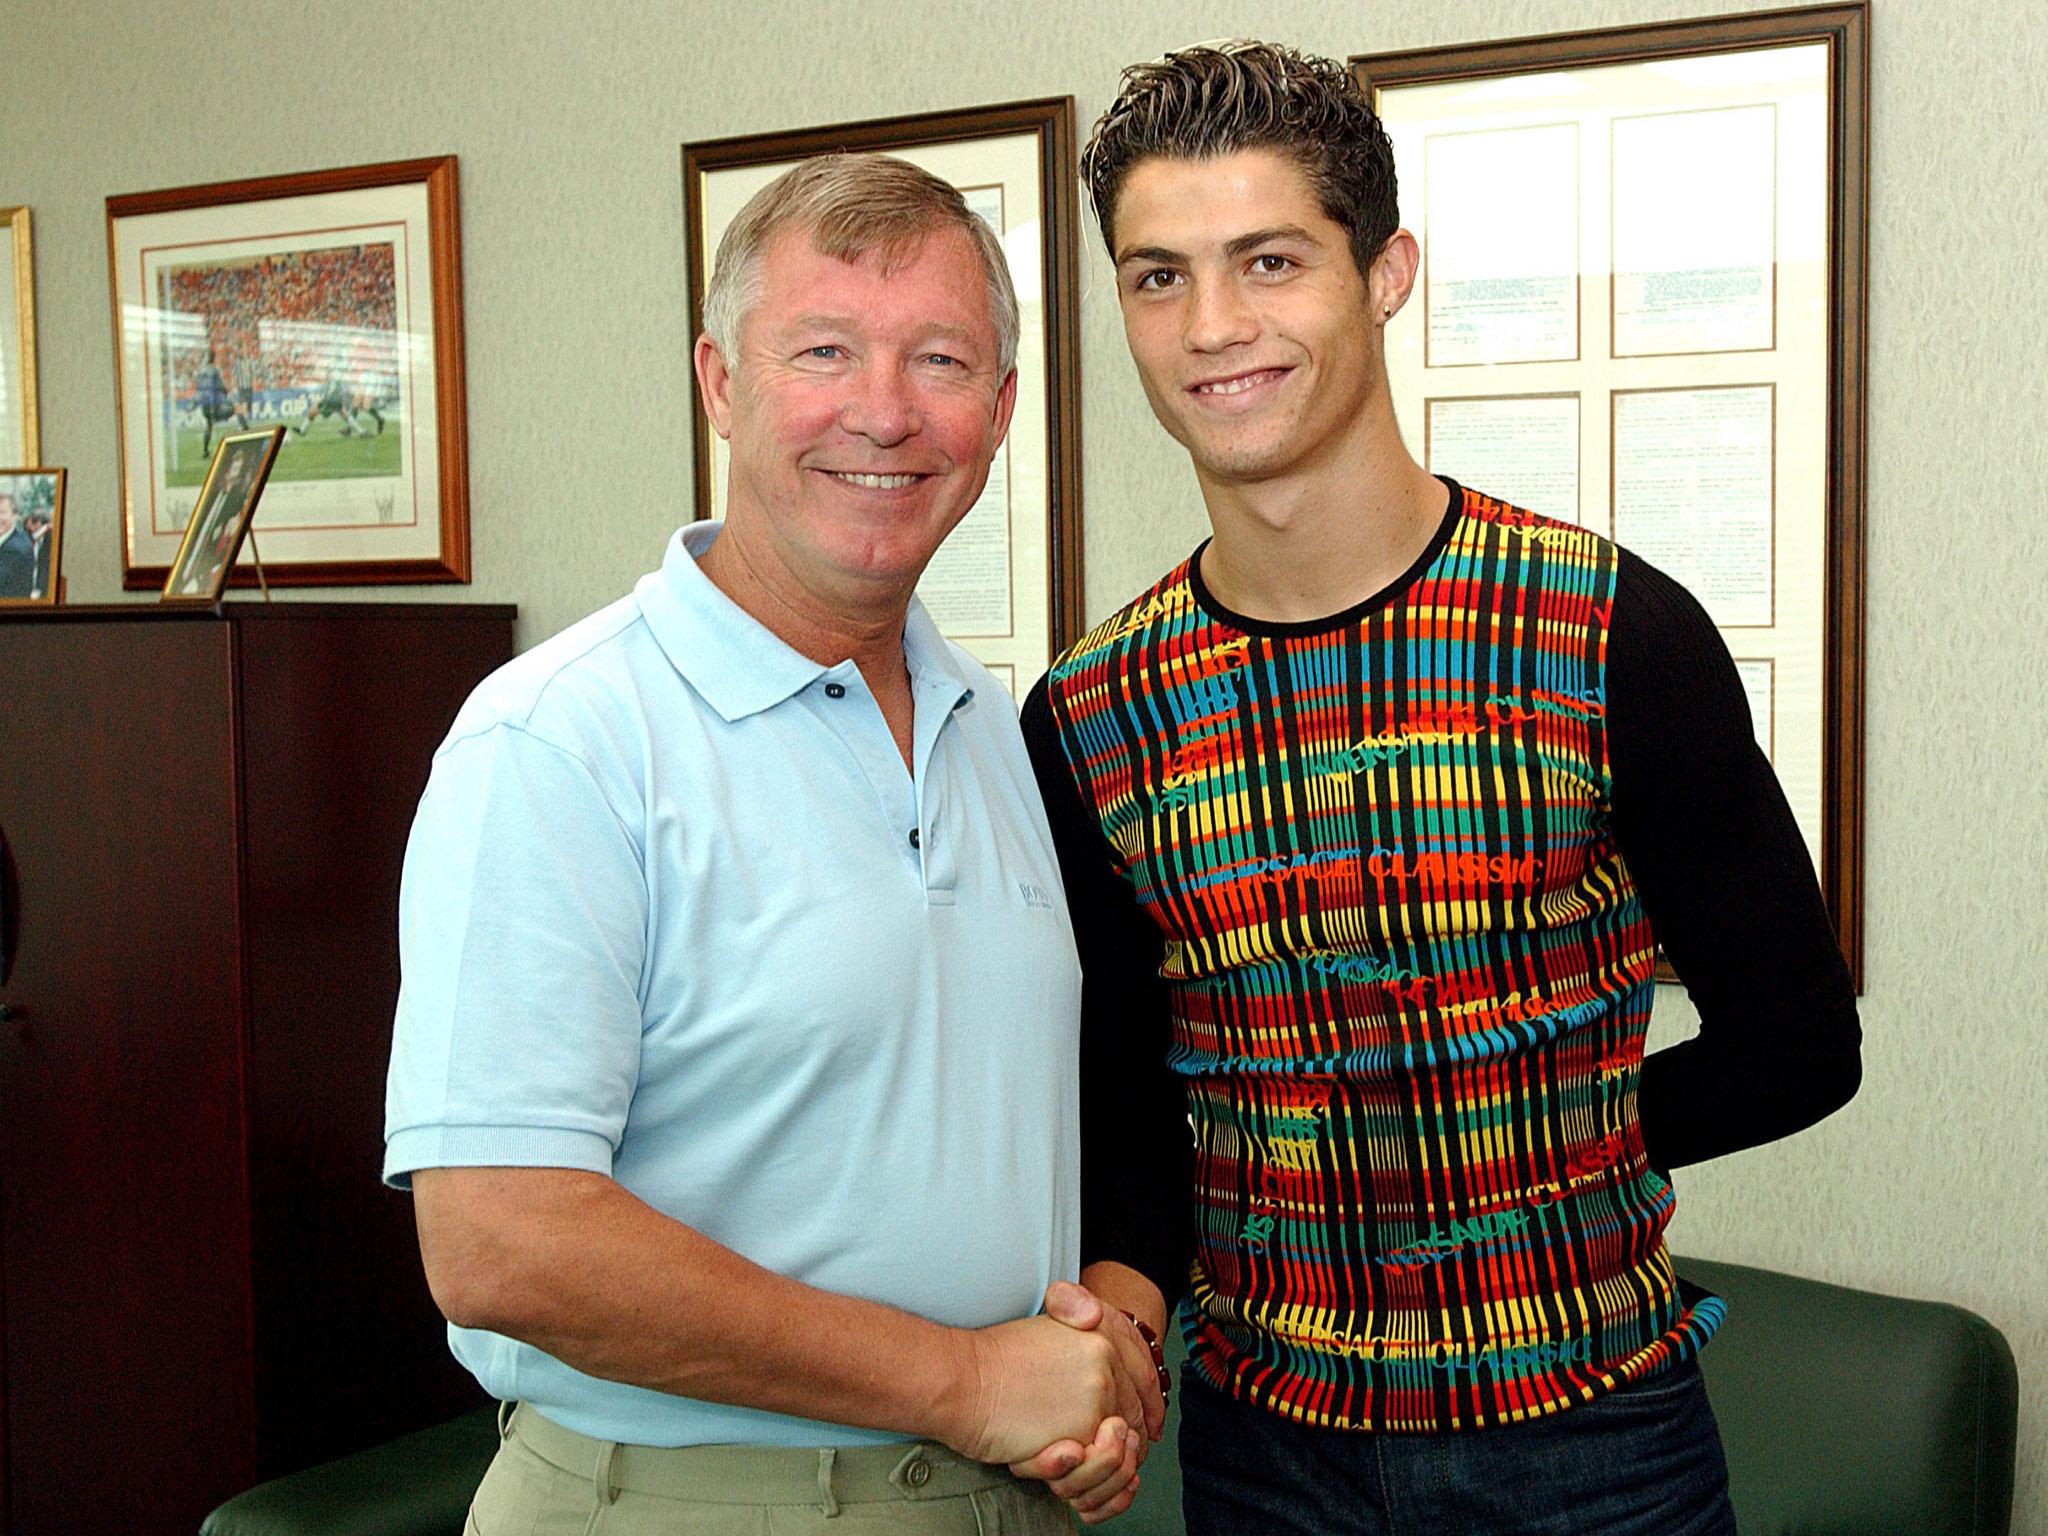 United signed Ronaldo in 2003 and the rest is history